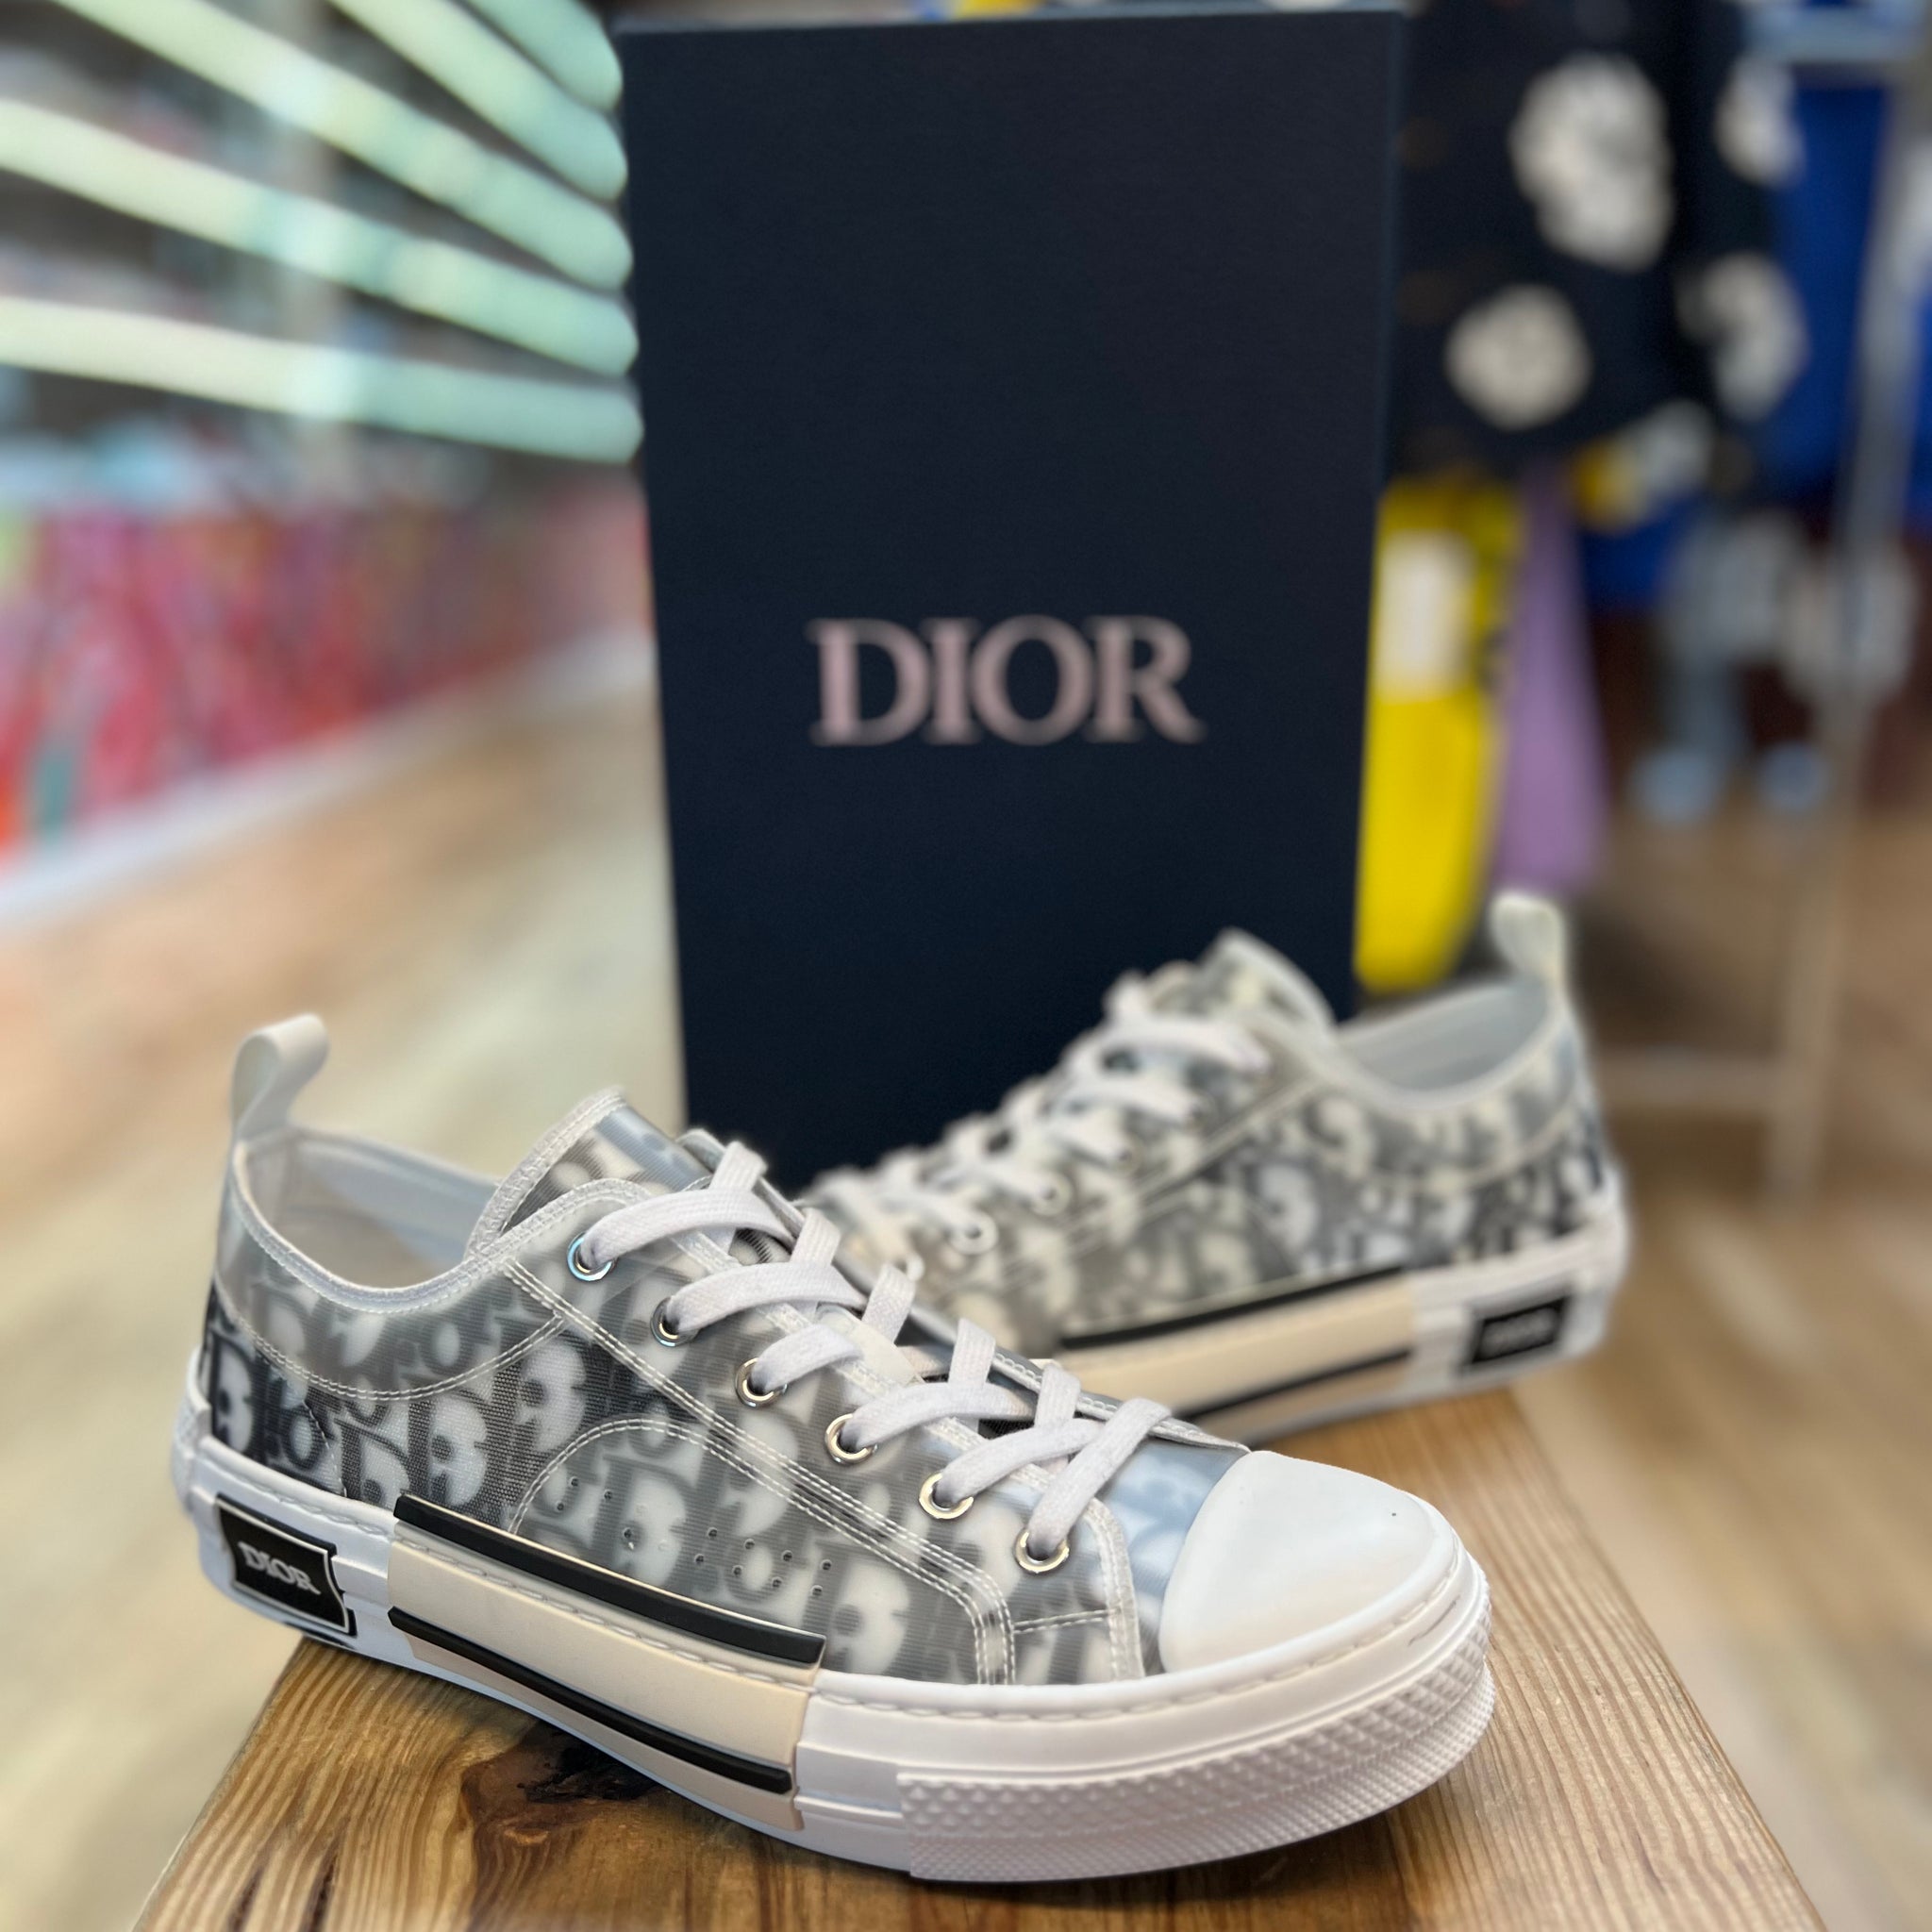 Dior B23 Low "Grey" (Pre-Owned)